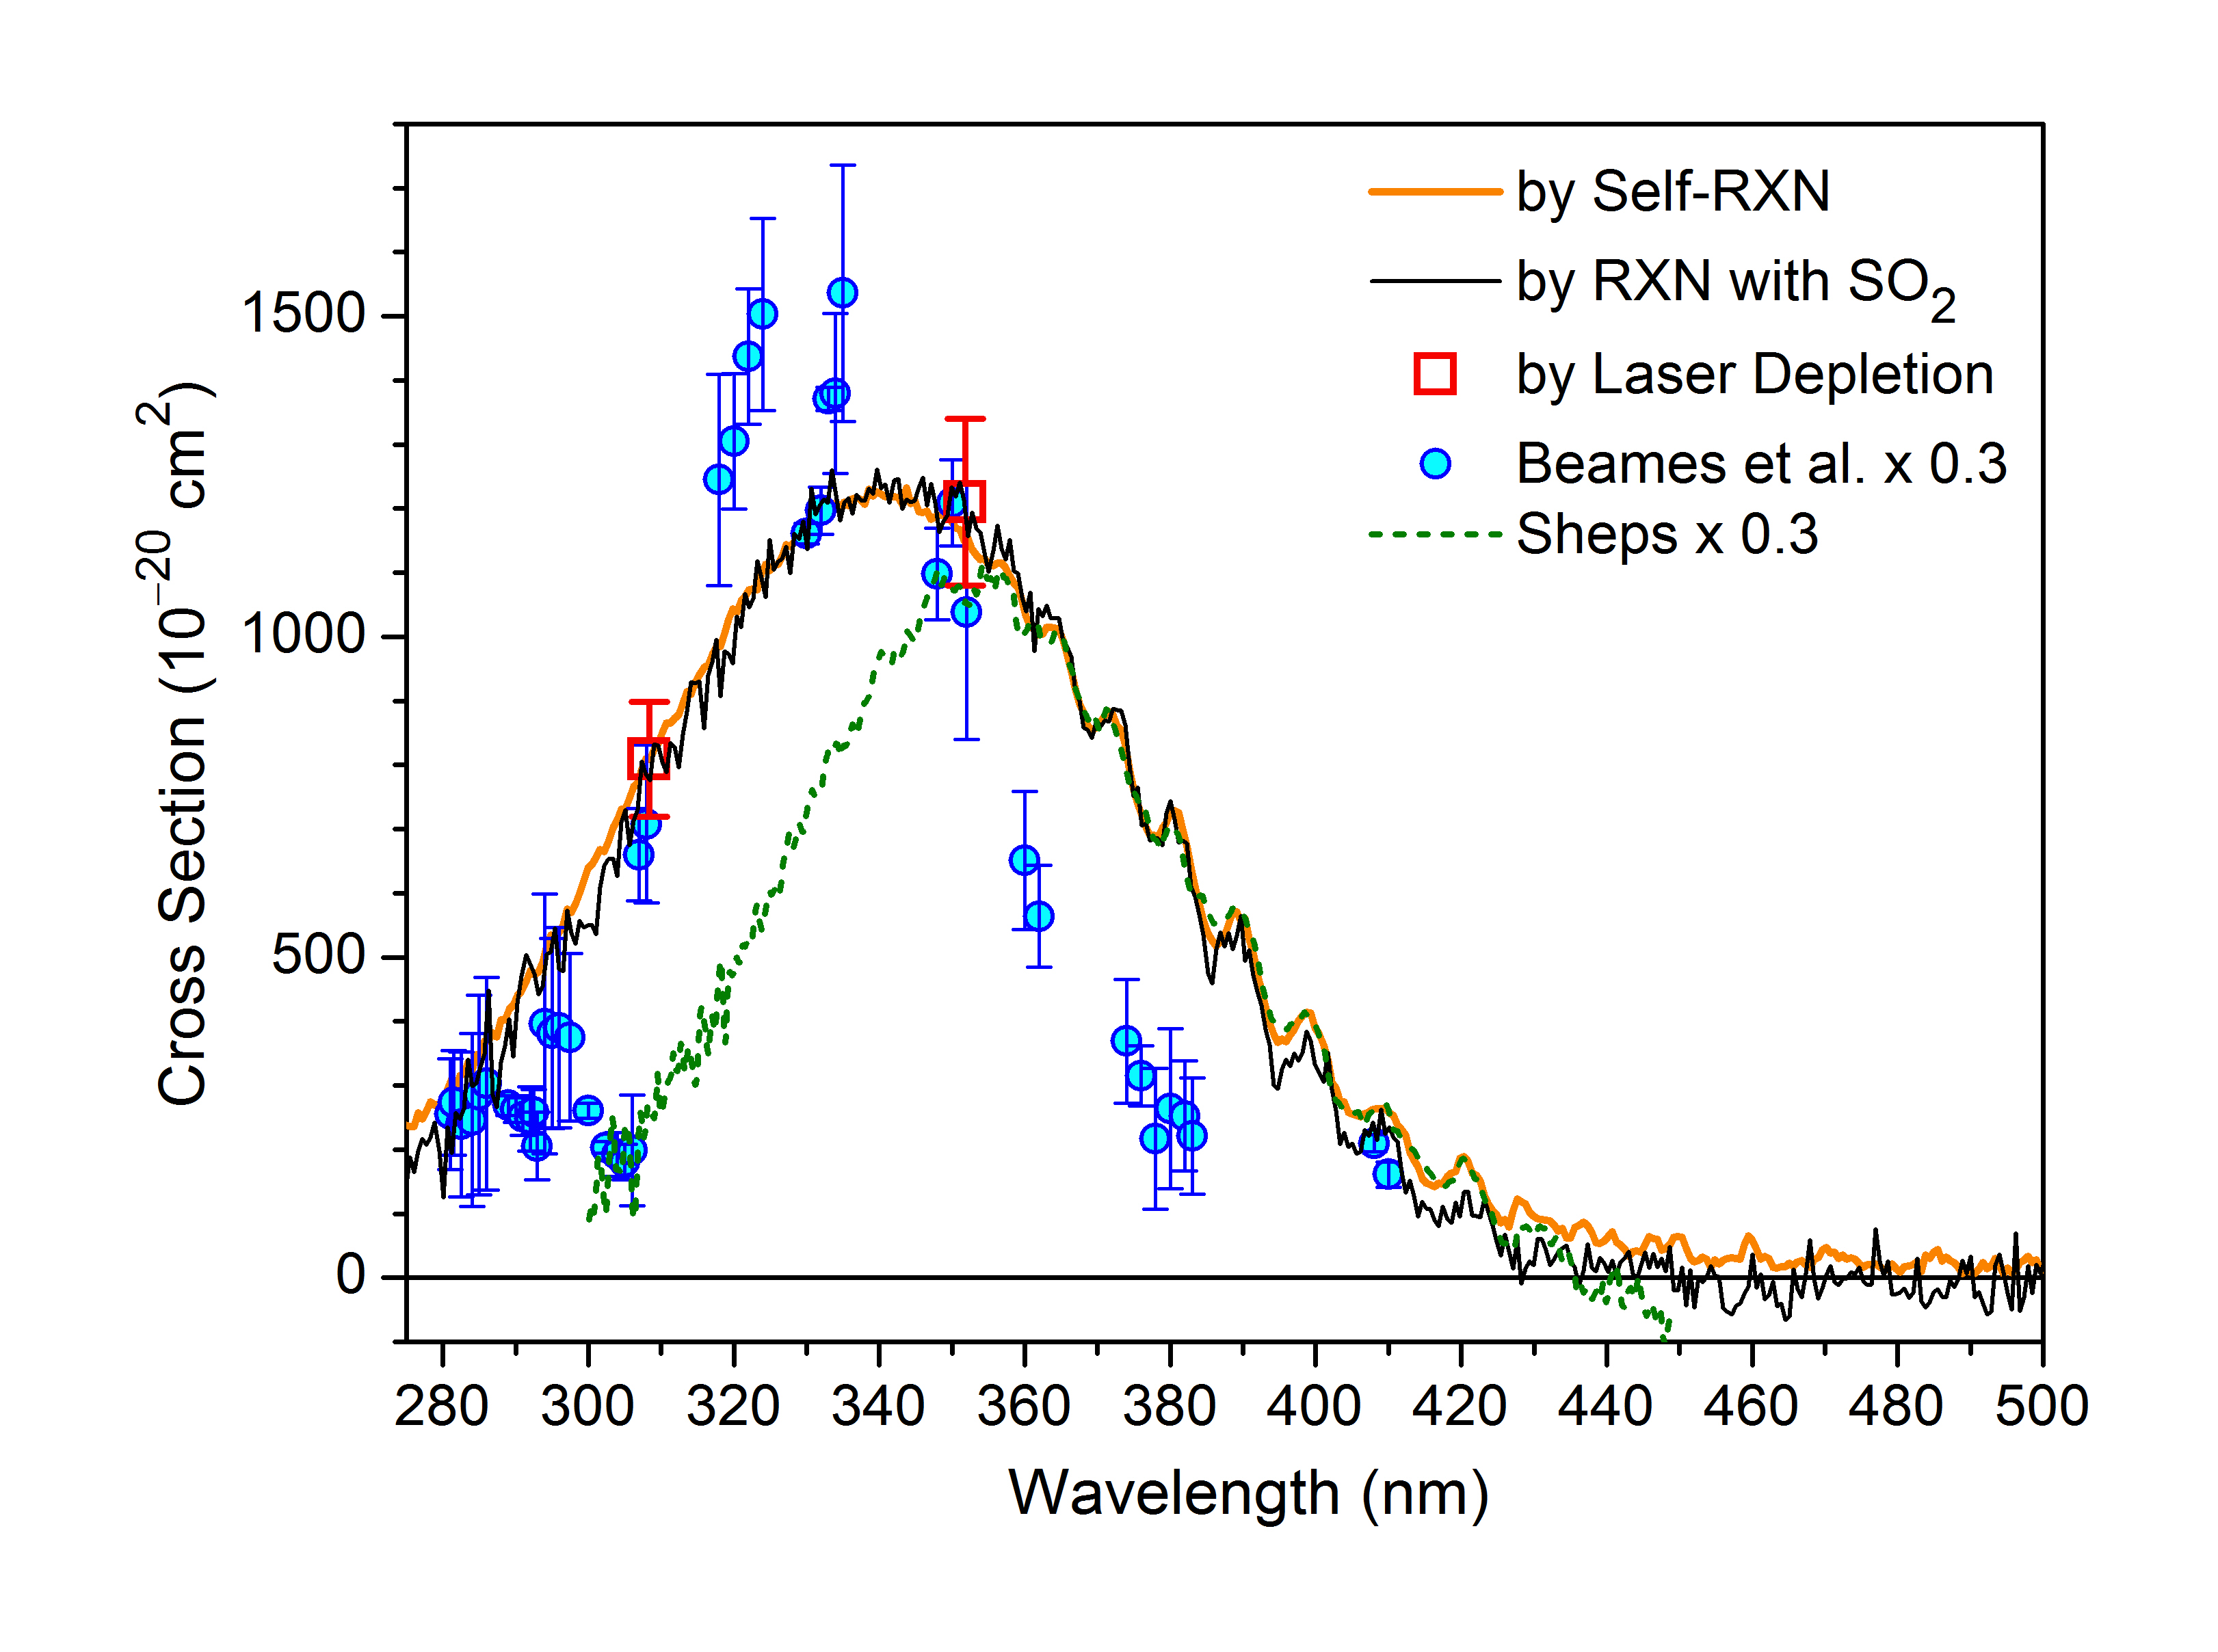 The UV absorption spectrum of the simplest Criegee intermediate CH2OO